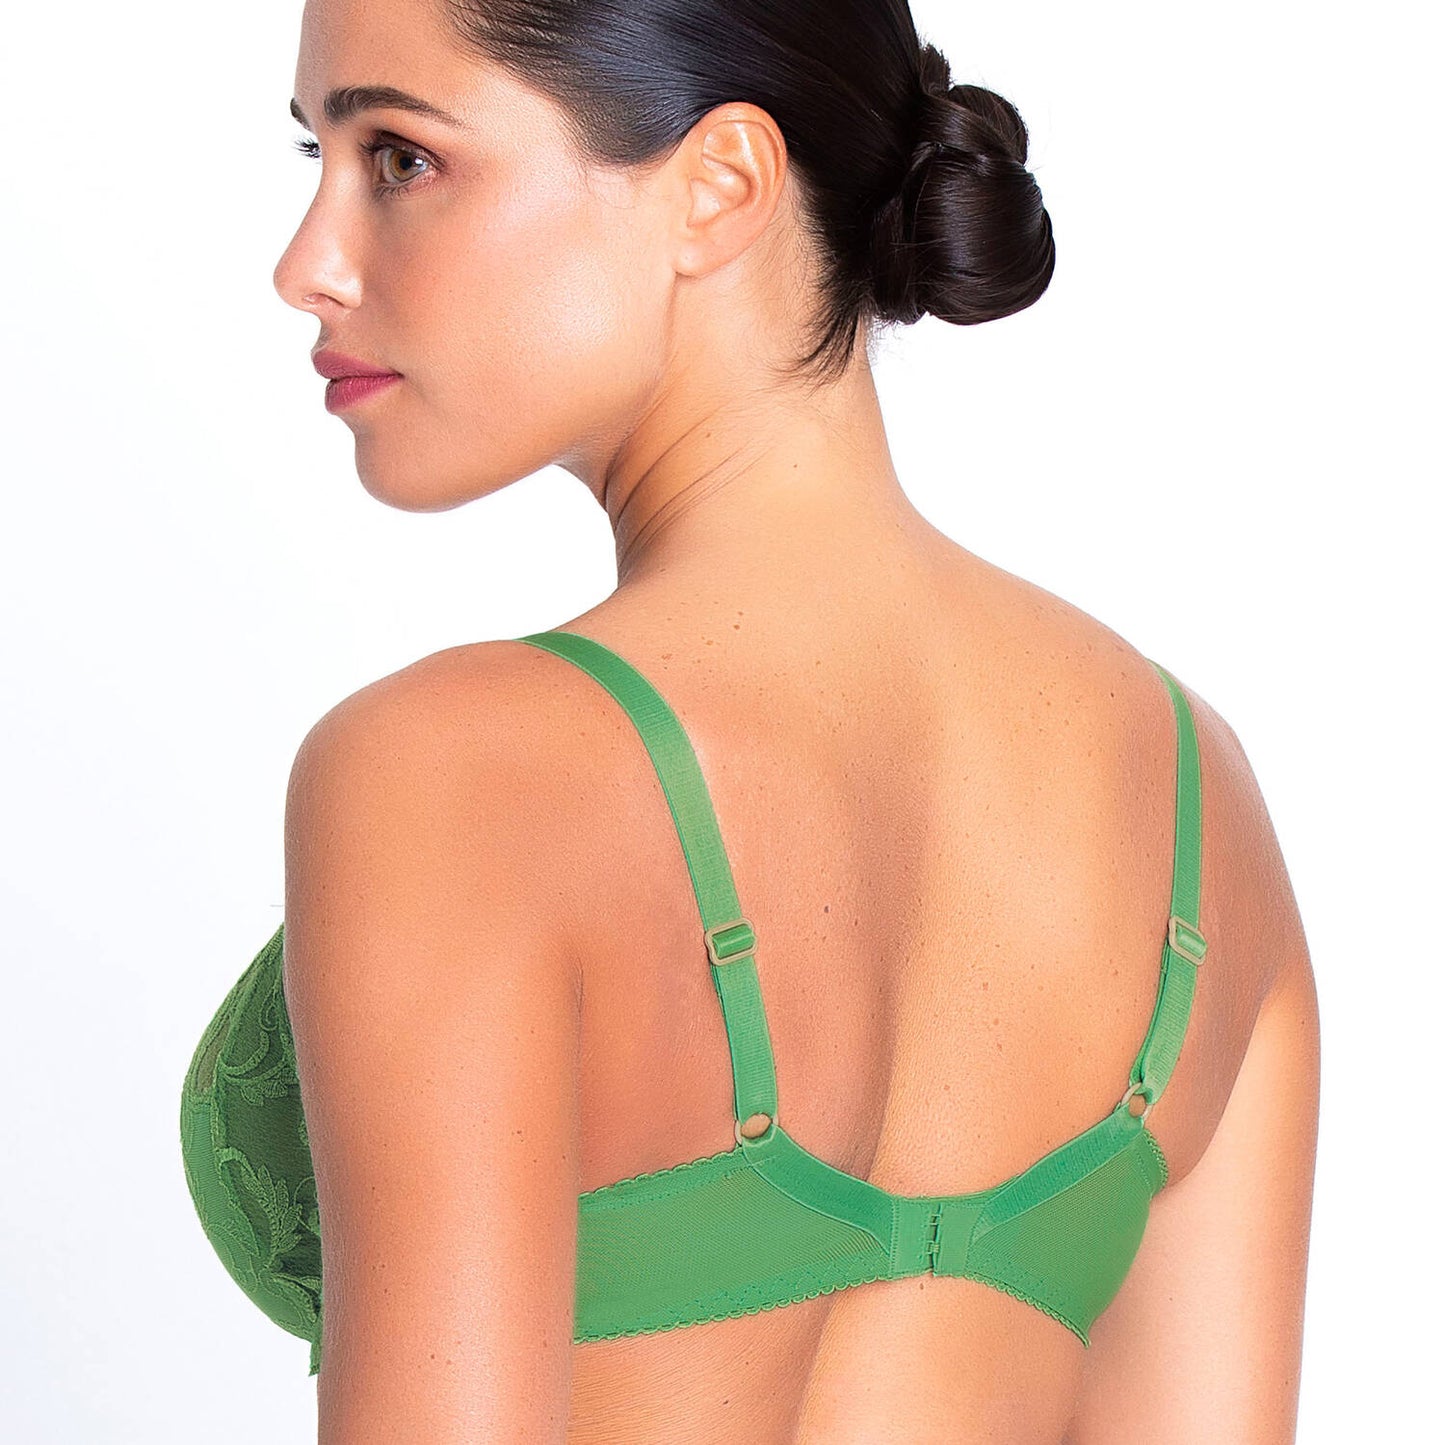 Dressing Floral in "Emeraude" 3 Parts Full Cup Bra By Lise Charmel - 32-44 D-G (EURO/US)